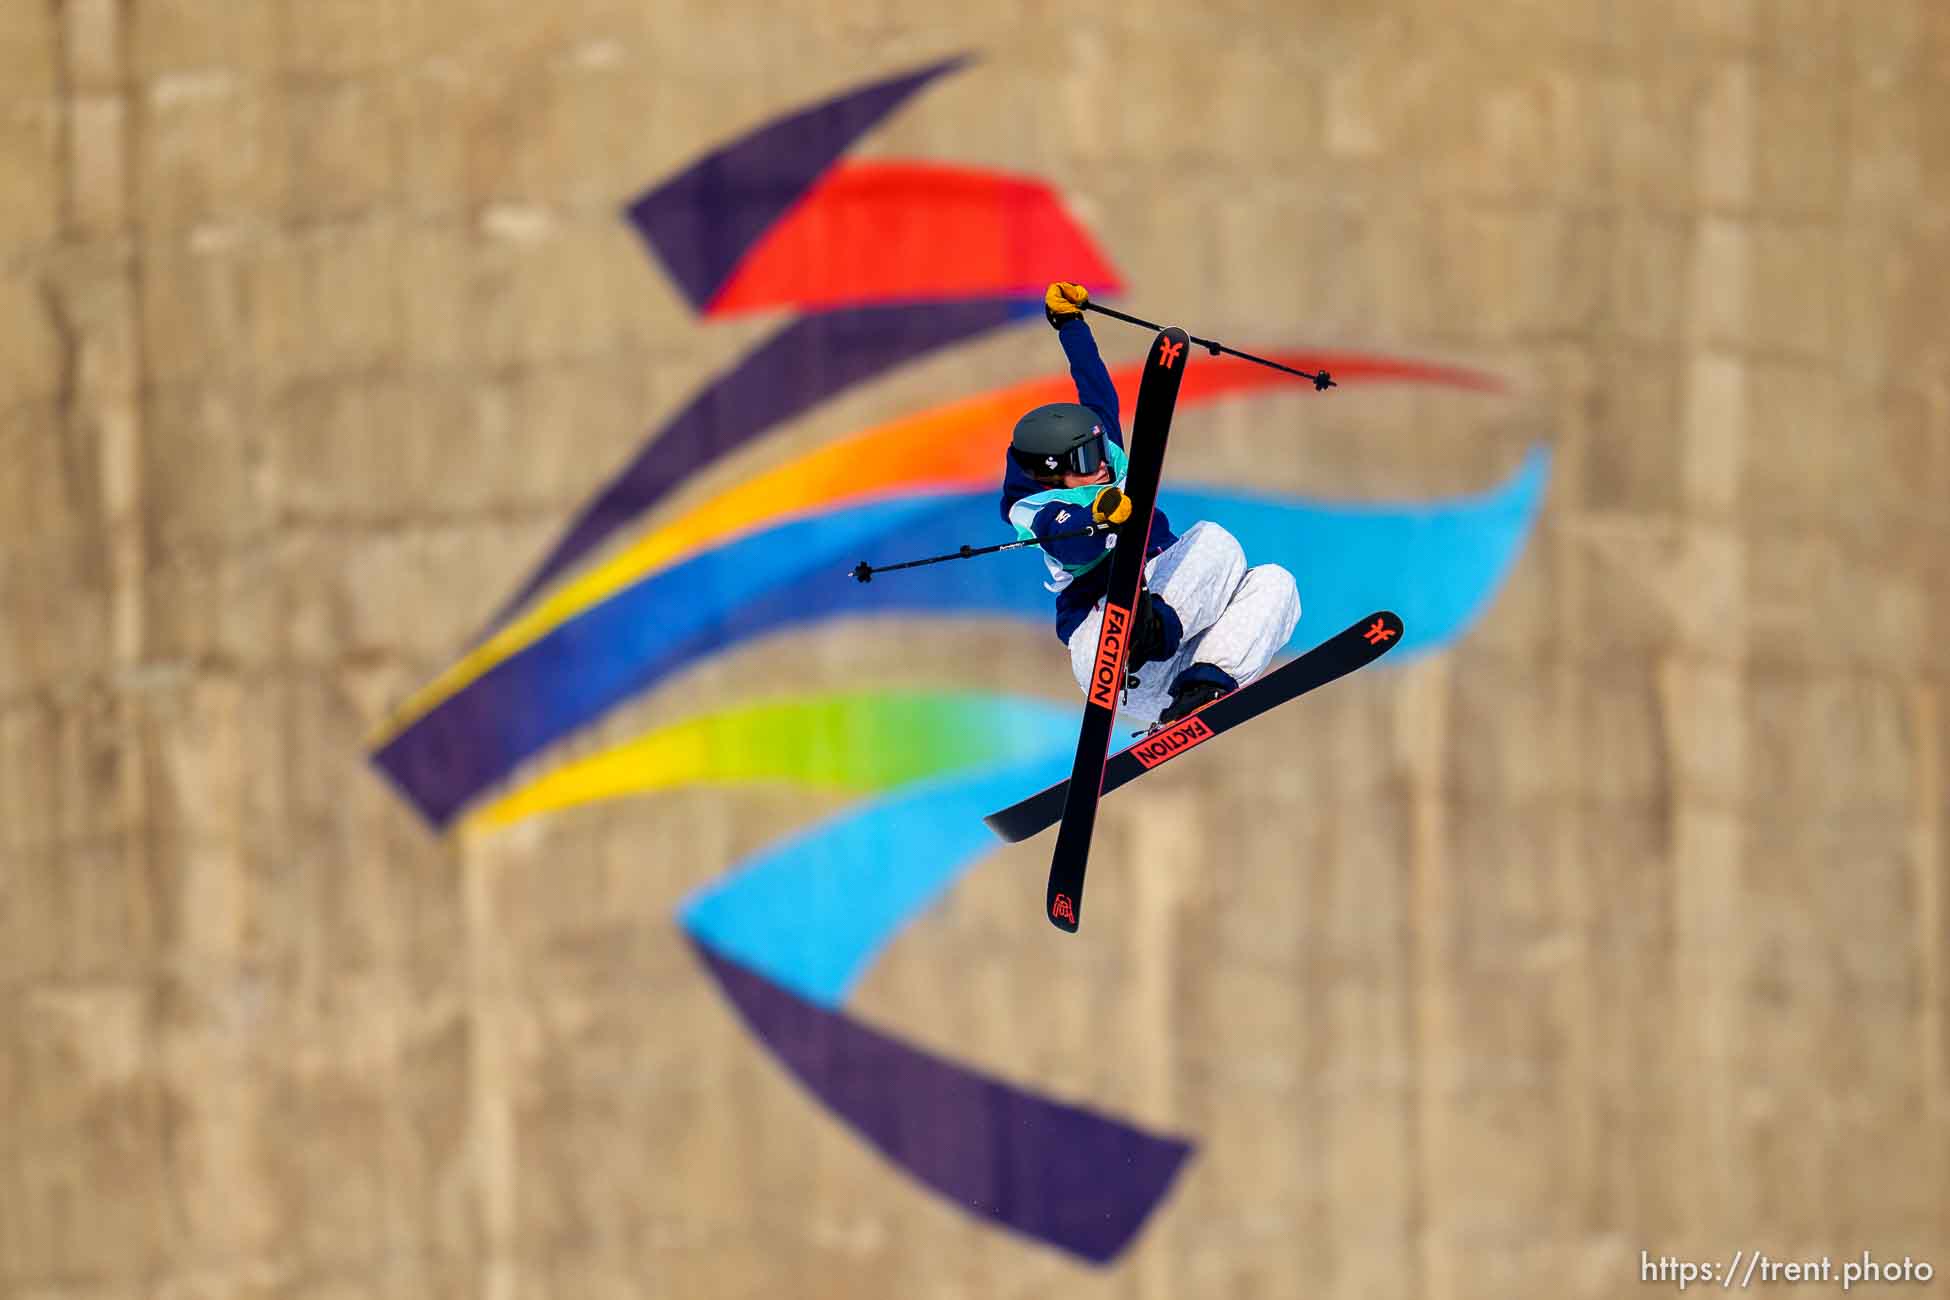 (Trent Nelson  |  The Salt Lake Tribune) Caroline Claire competes in the big air qualification round at the 2022 Winter Olympics in Beijing on Monday, Feb. 7, 2022.